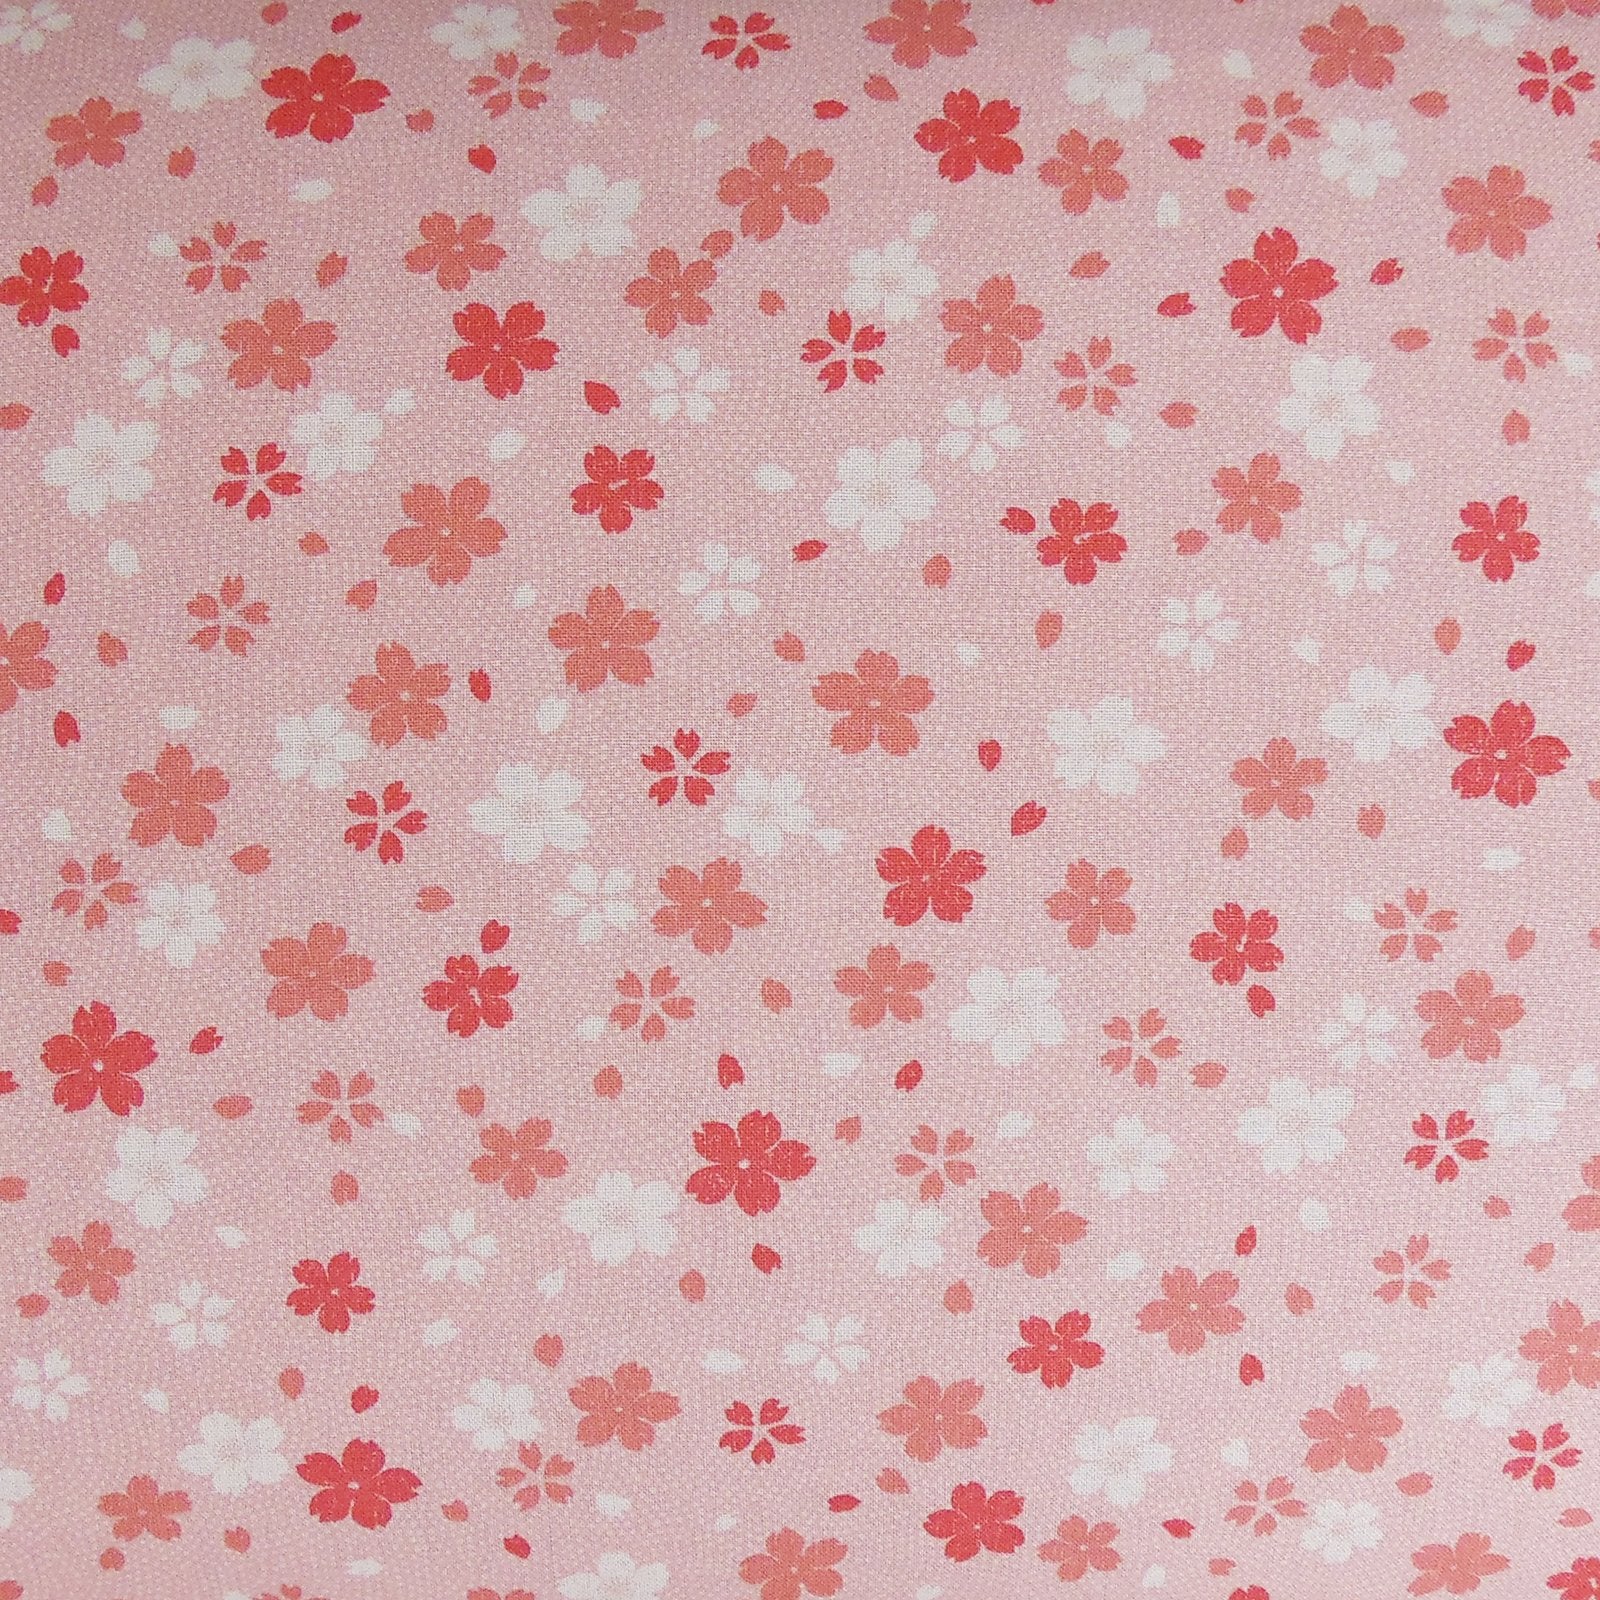 Imported Japanese Fabric - Cherry Blossom Pink